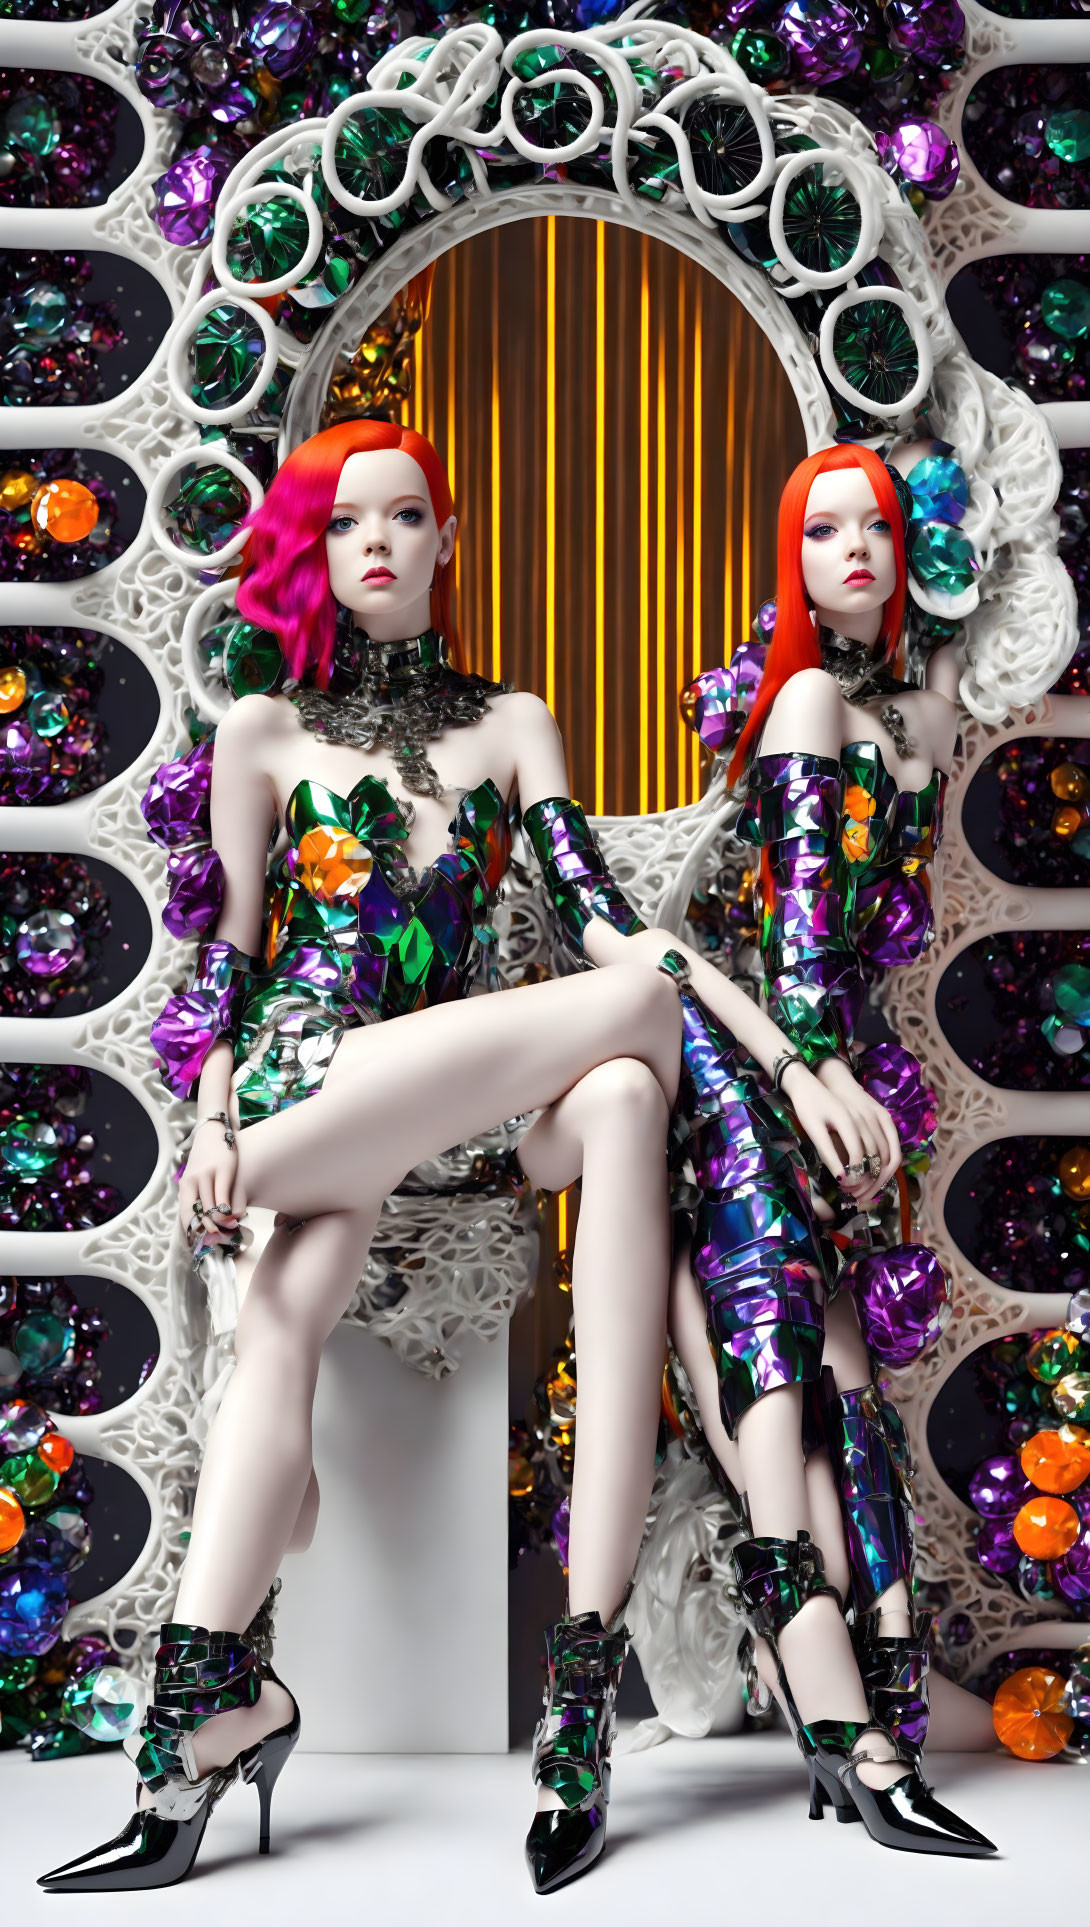 Vibrant hair models in metallic-patterned outfits by ornate mirror